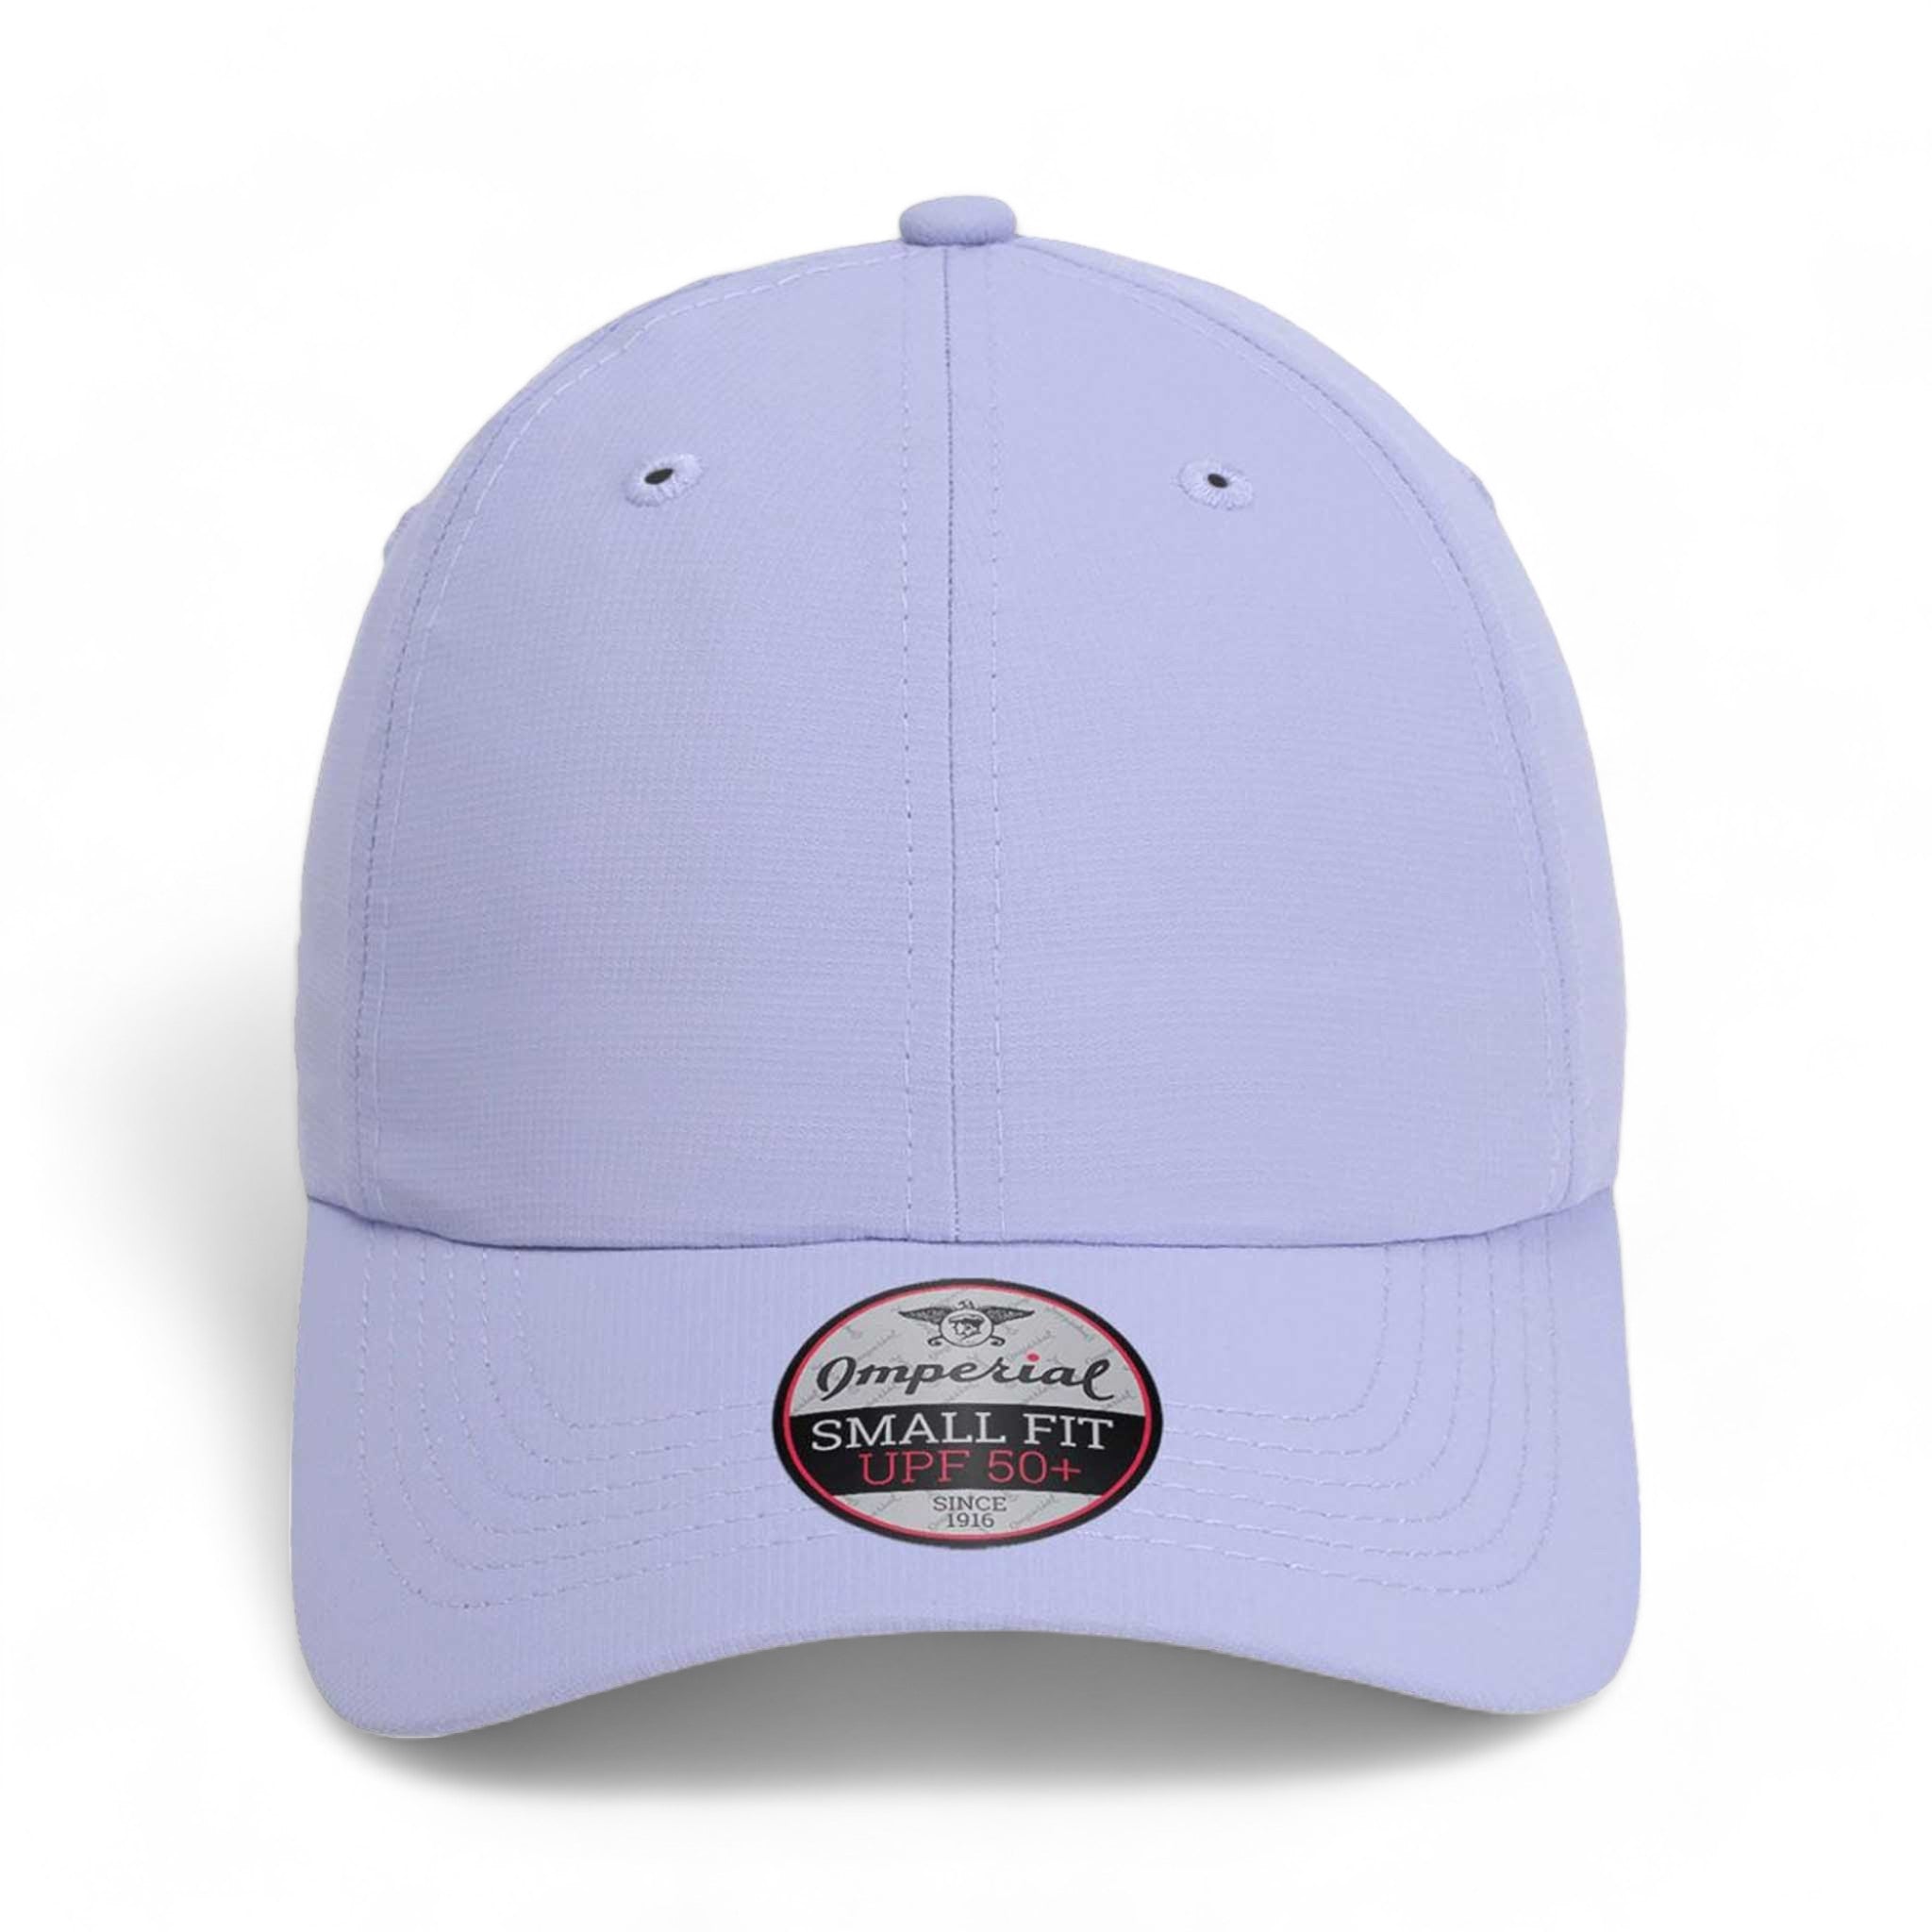 Front view of Imperial L338 custom hat in lavender